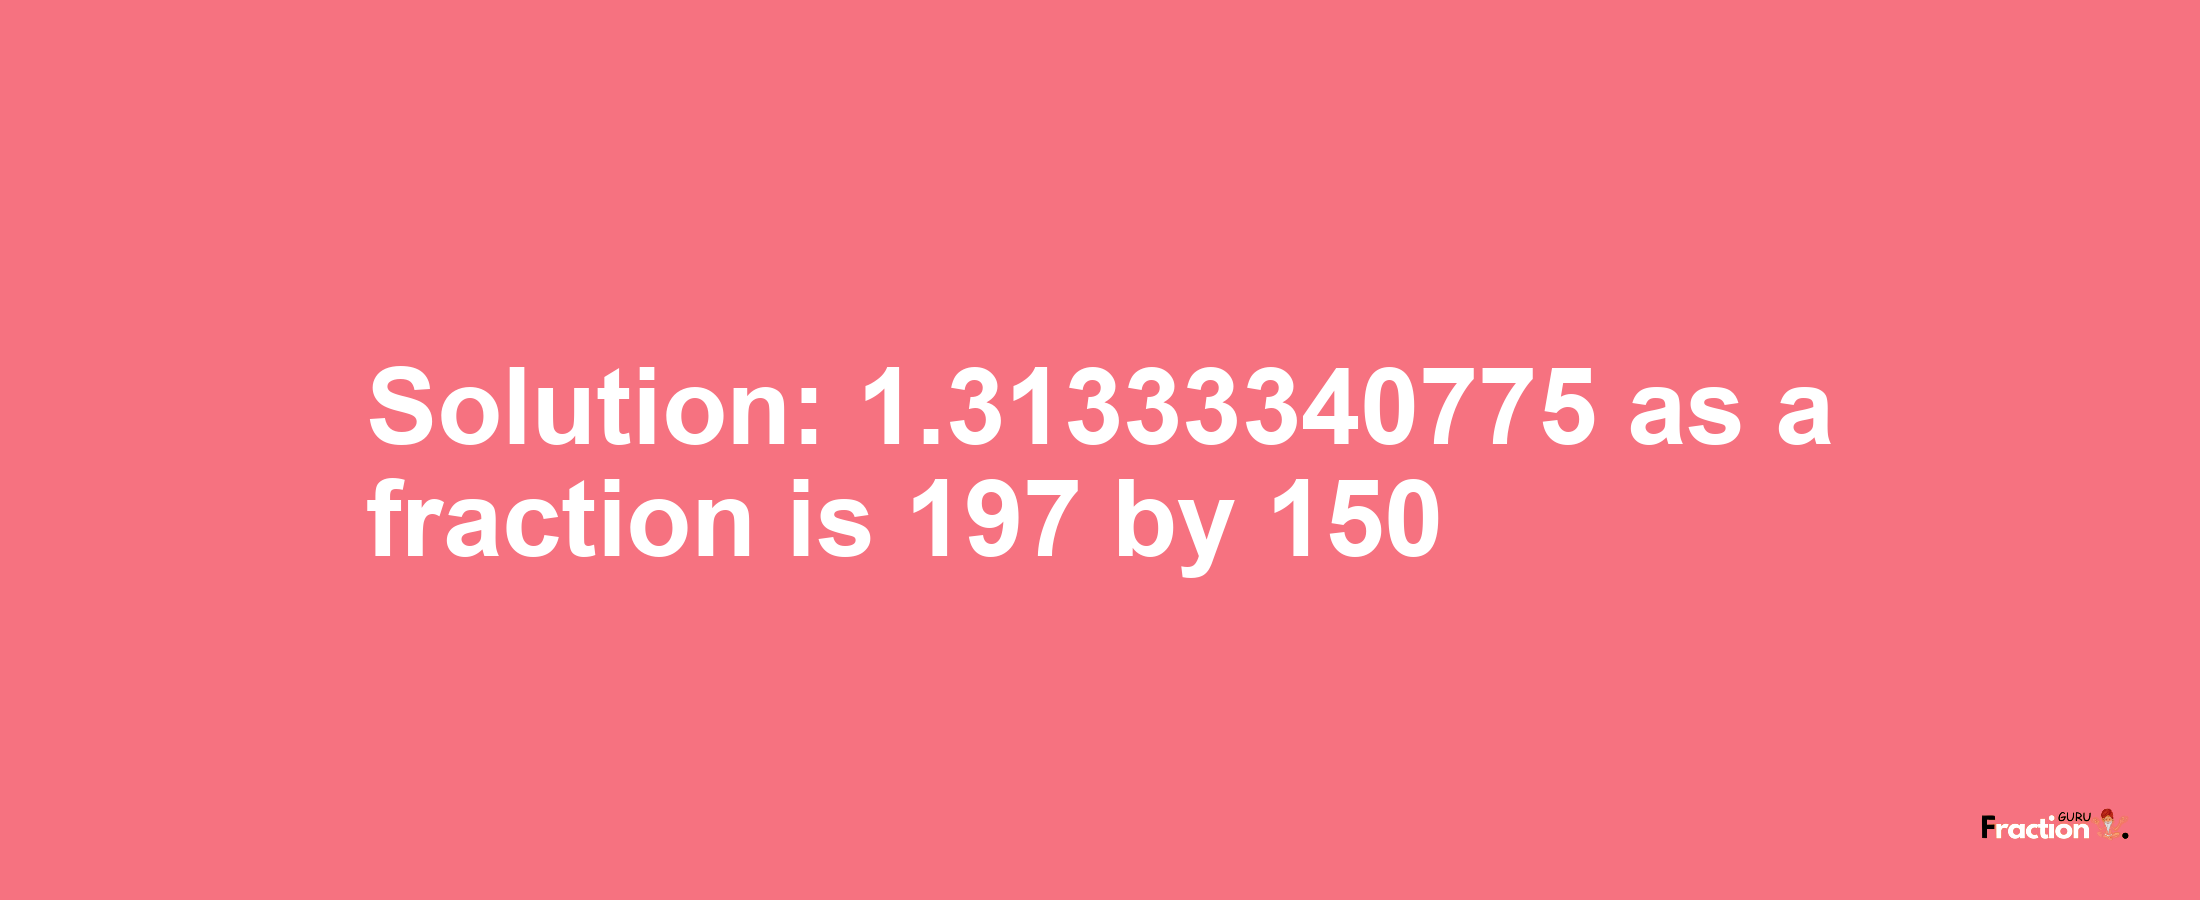 Solution:1.31333340775 as a fraction is 197/150